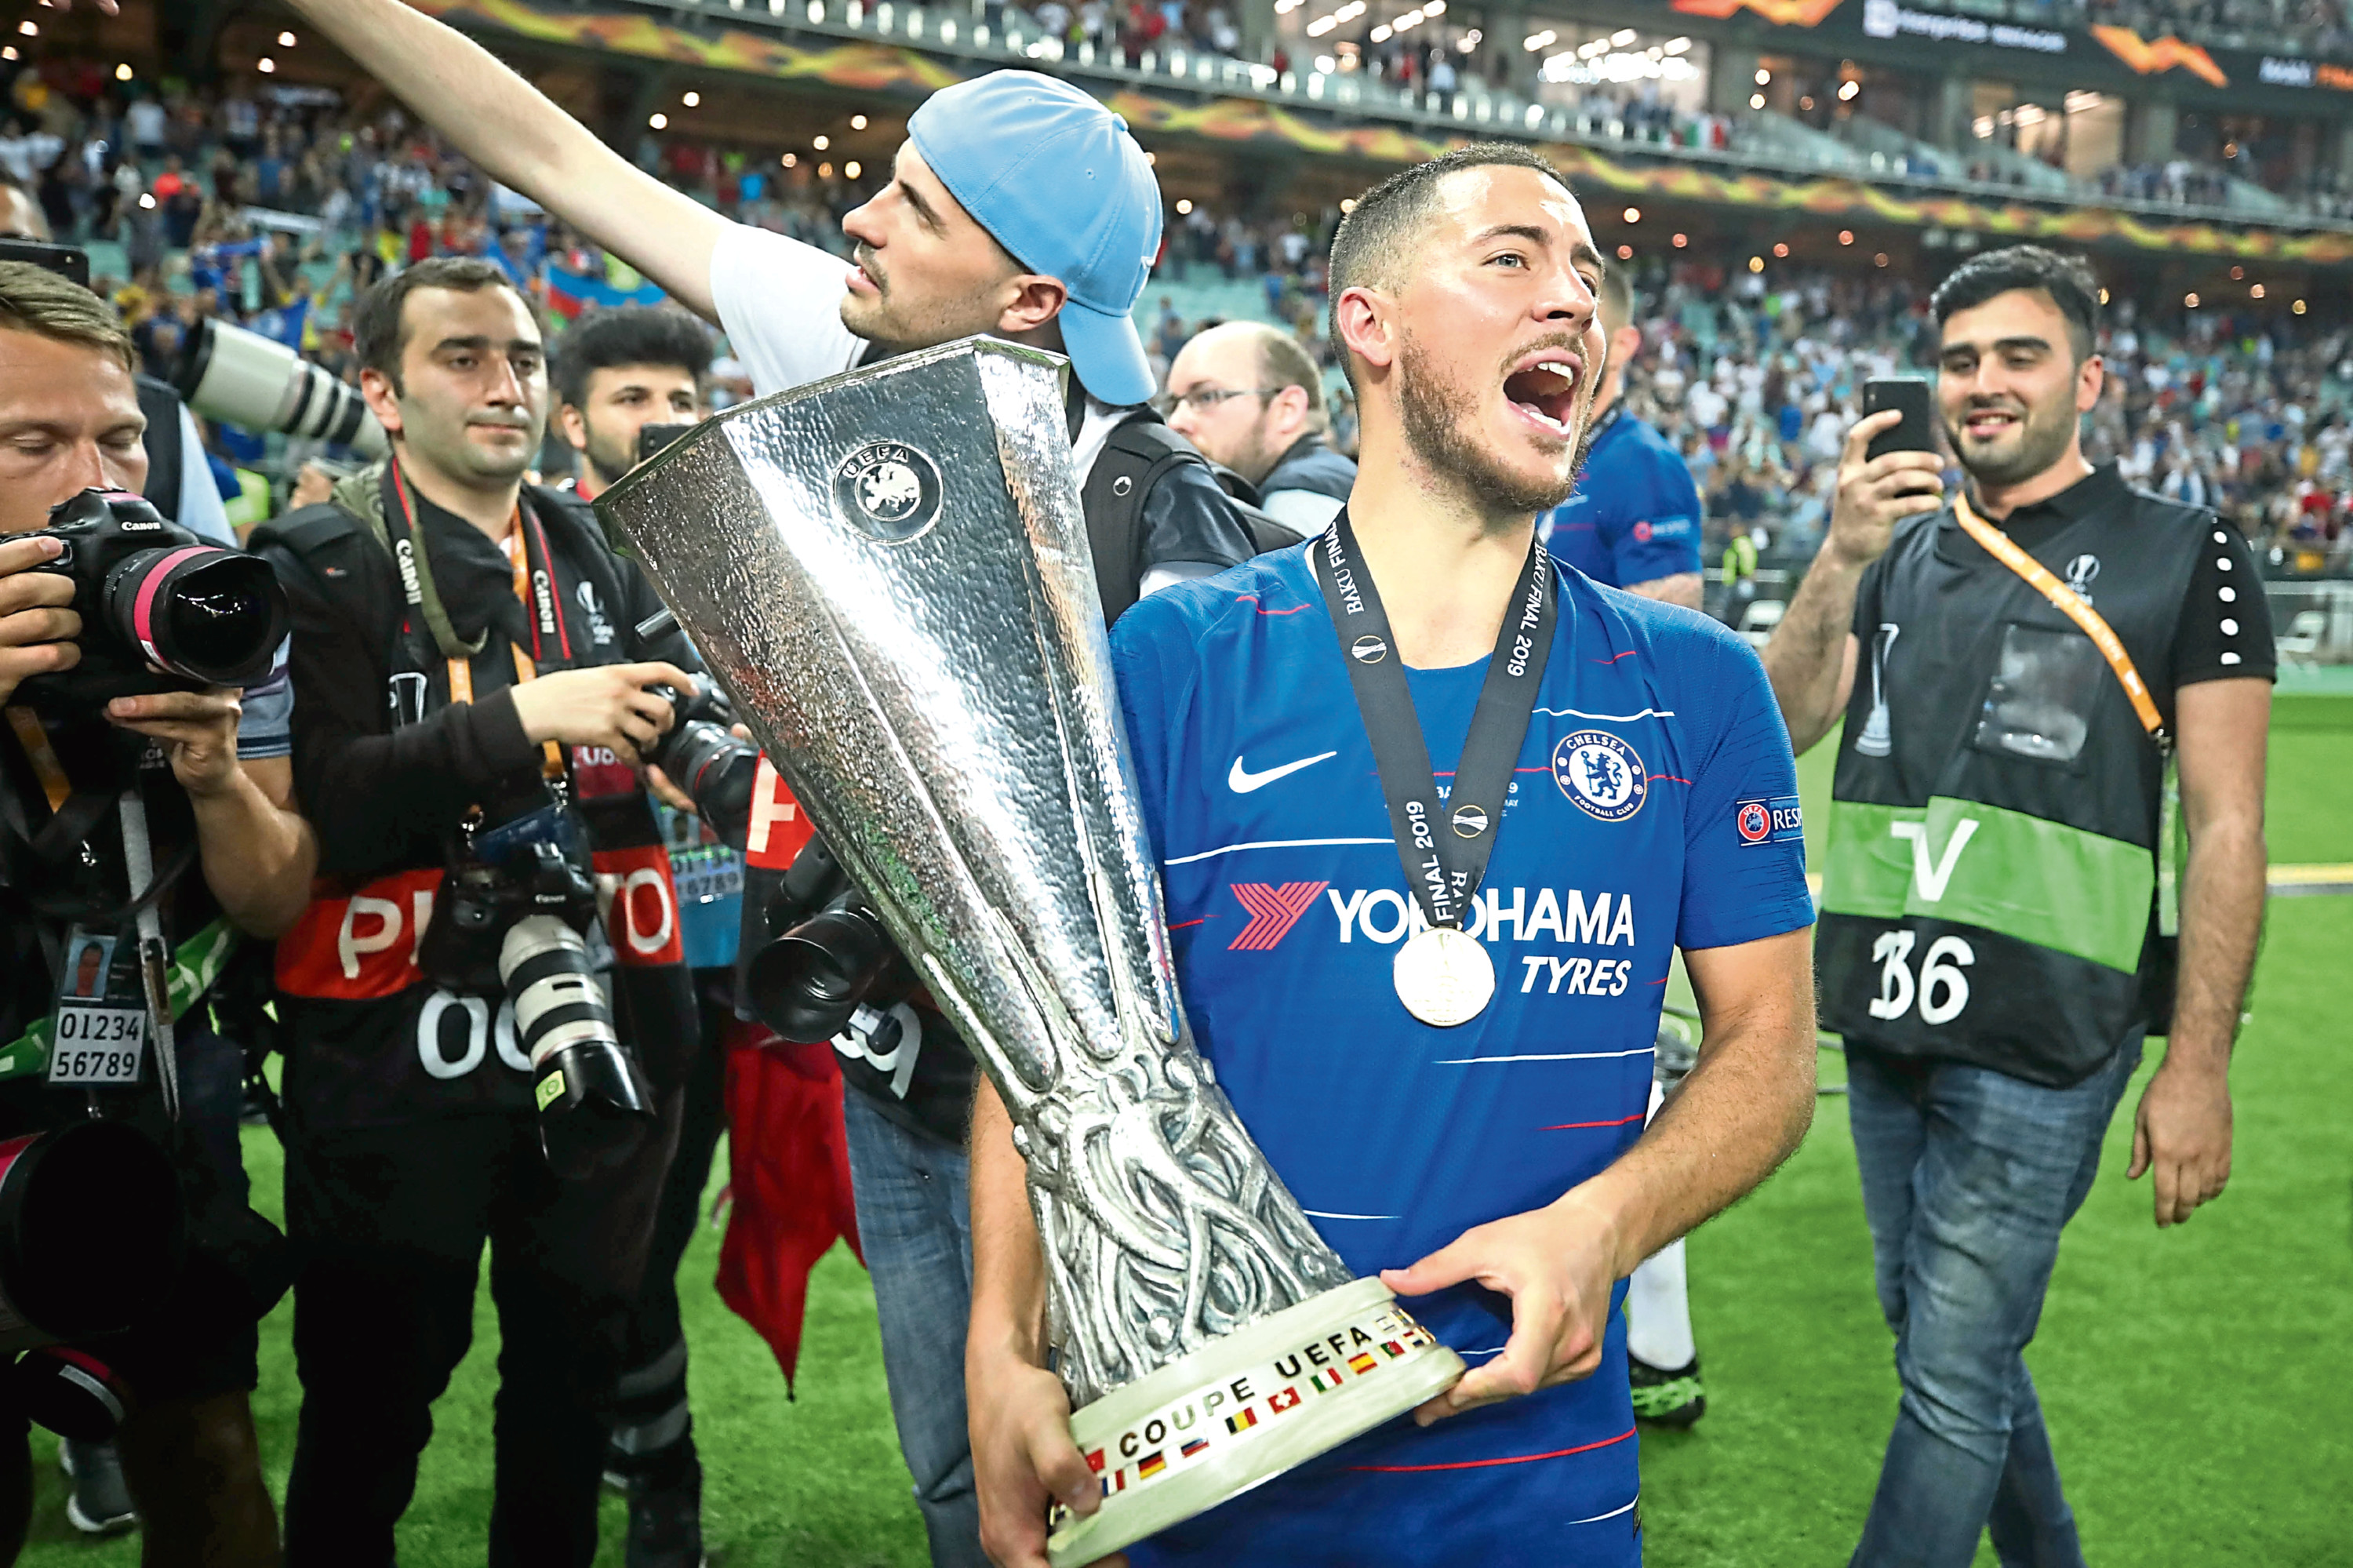 Eden Hazard lit up the Europa League Final for Chelsea and will be tough for Scotland to contain